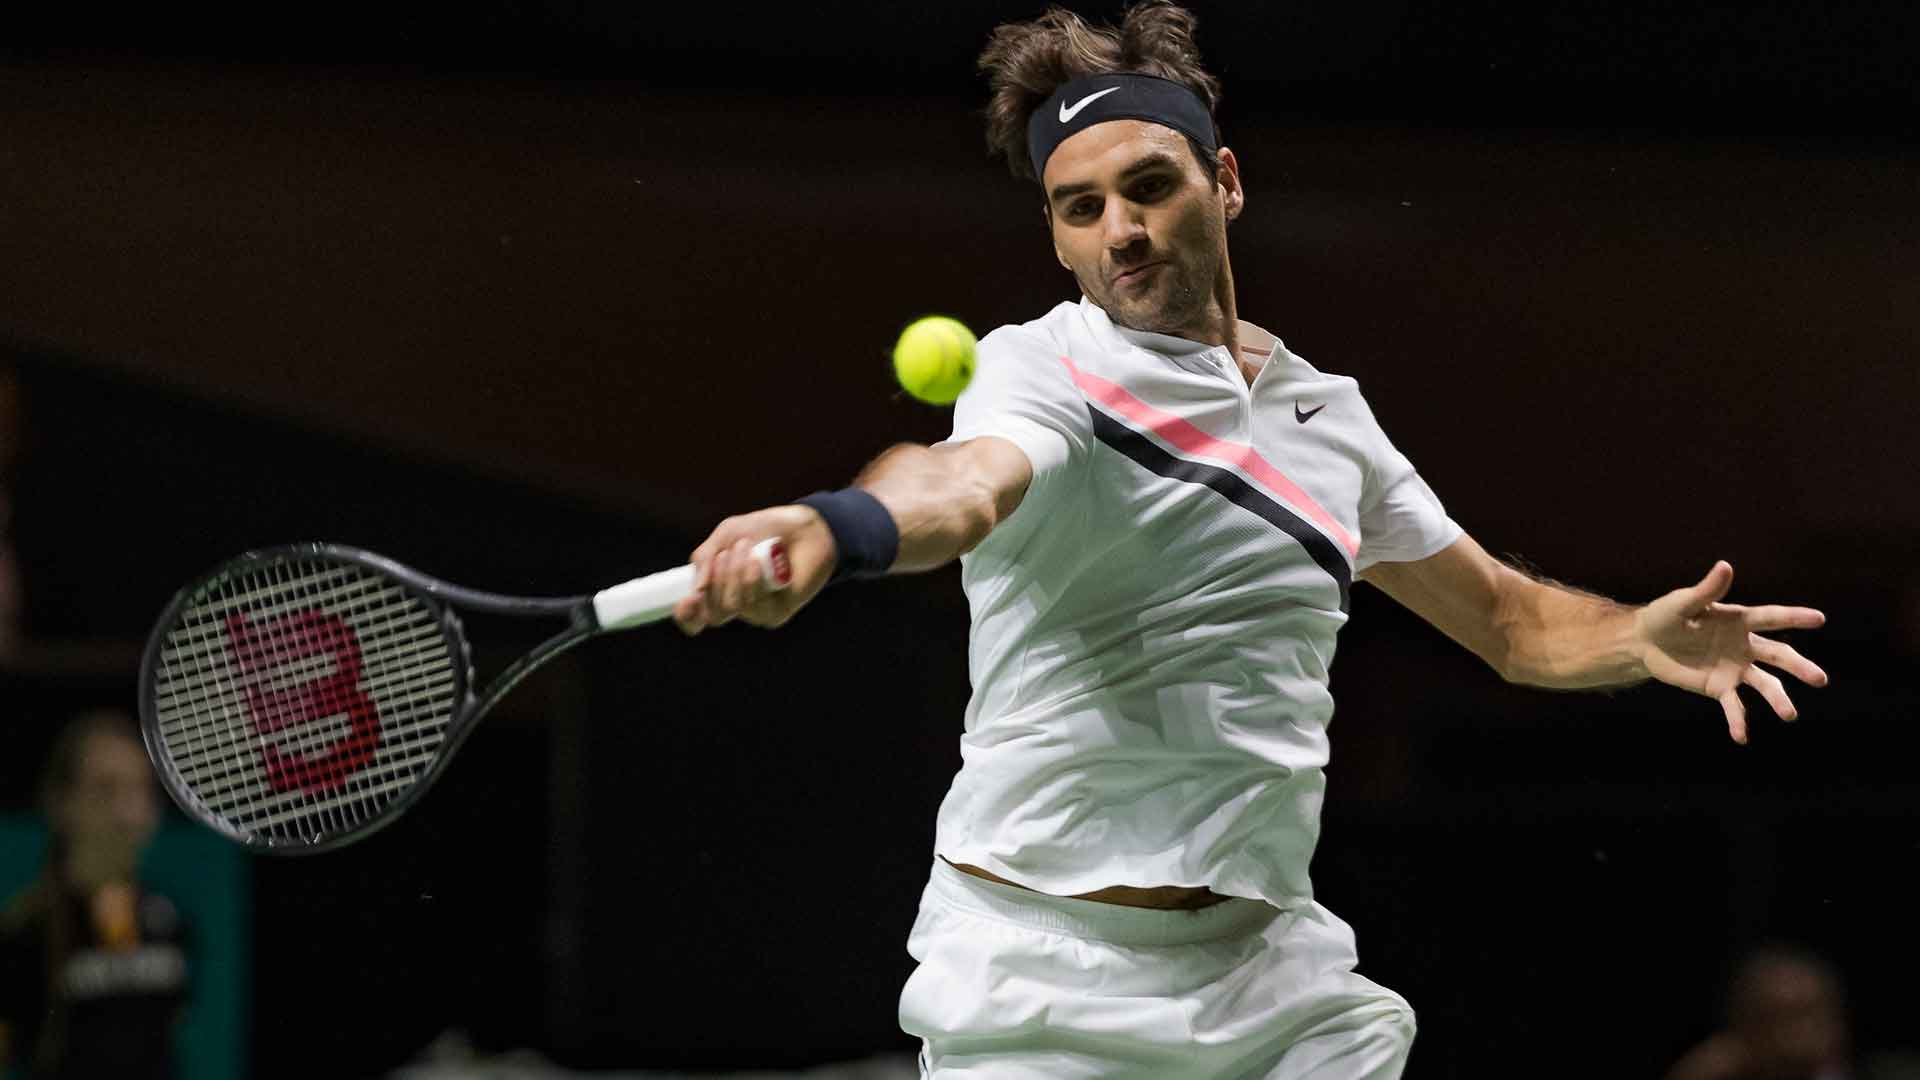 Roger Federer fights his way into form on Thursday night in a gritty second-round encounter over Philipp Kohlschreiber.